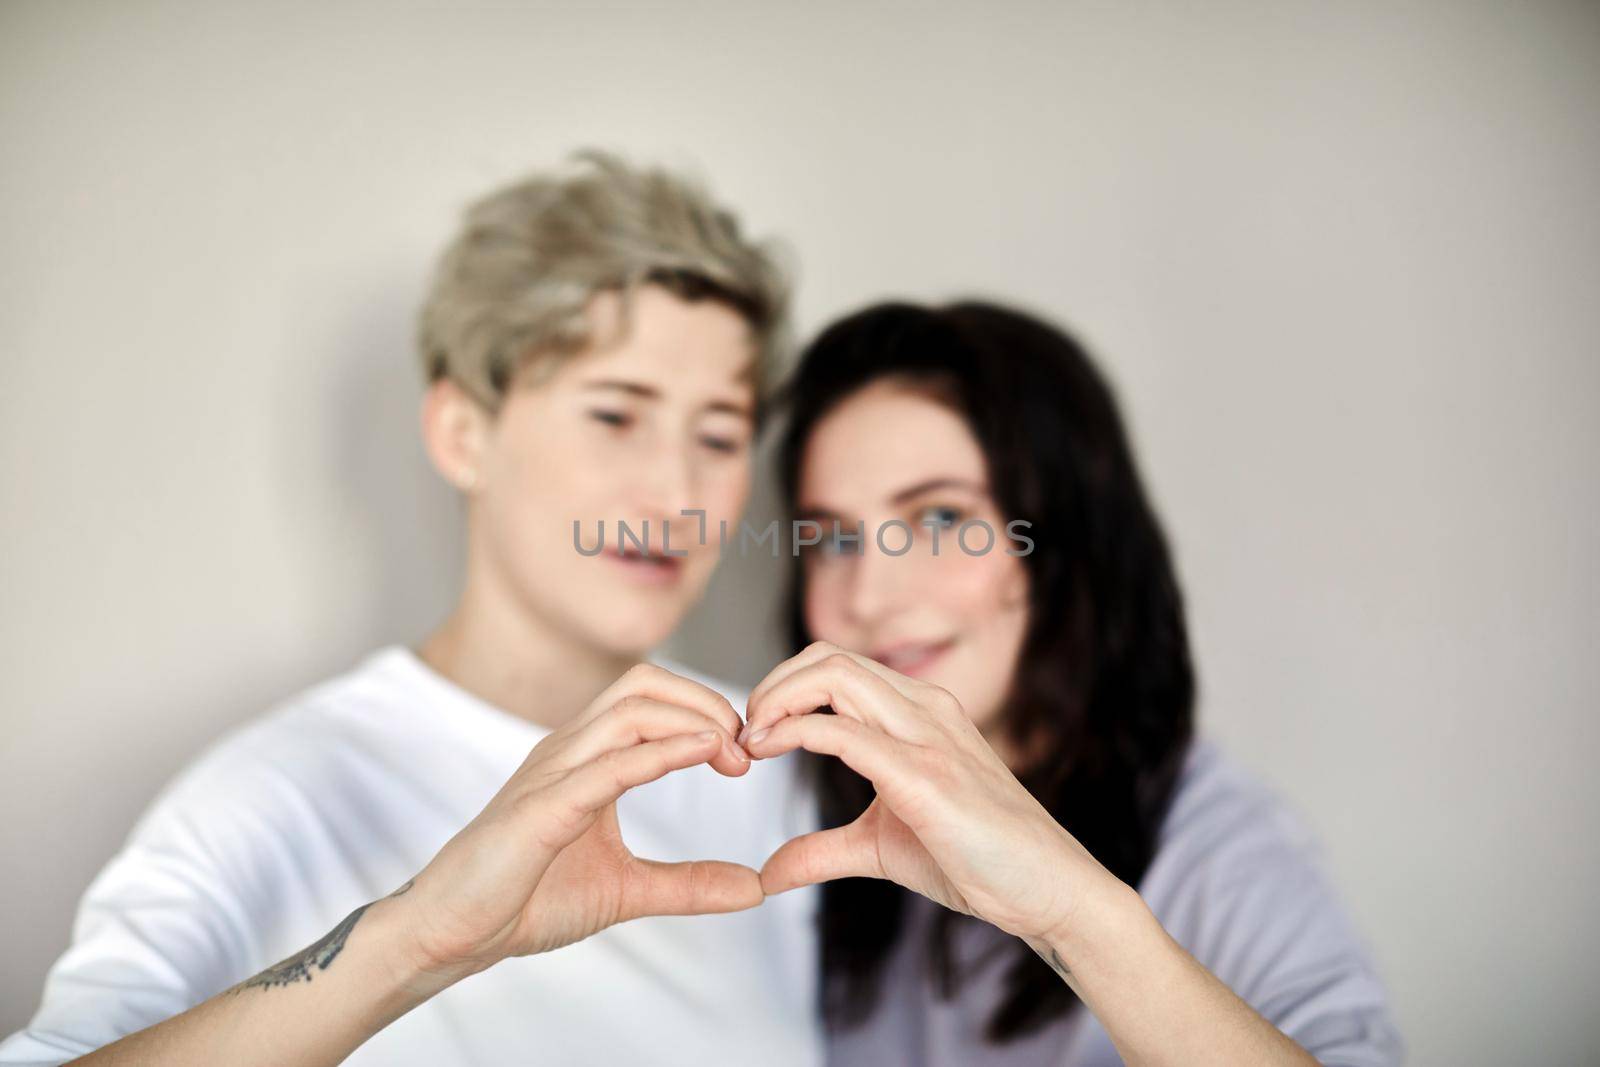 Selective focus of heart made by same sex female partners standing close and showing love gesture